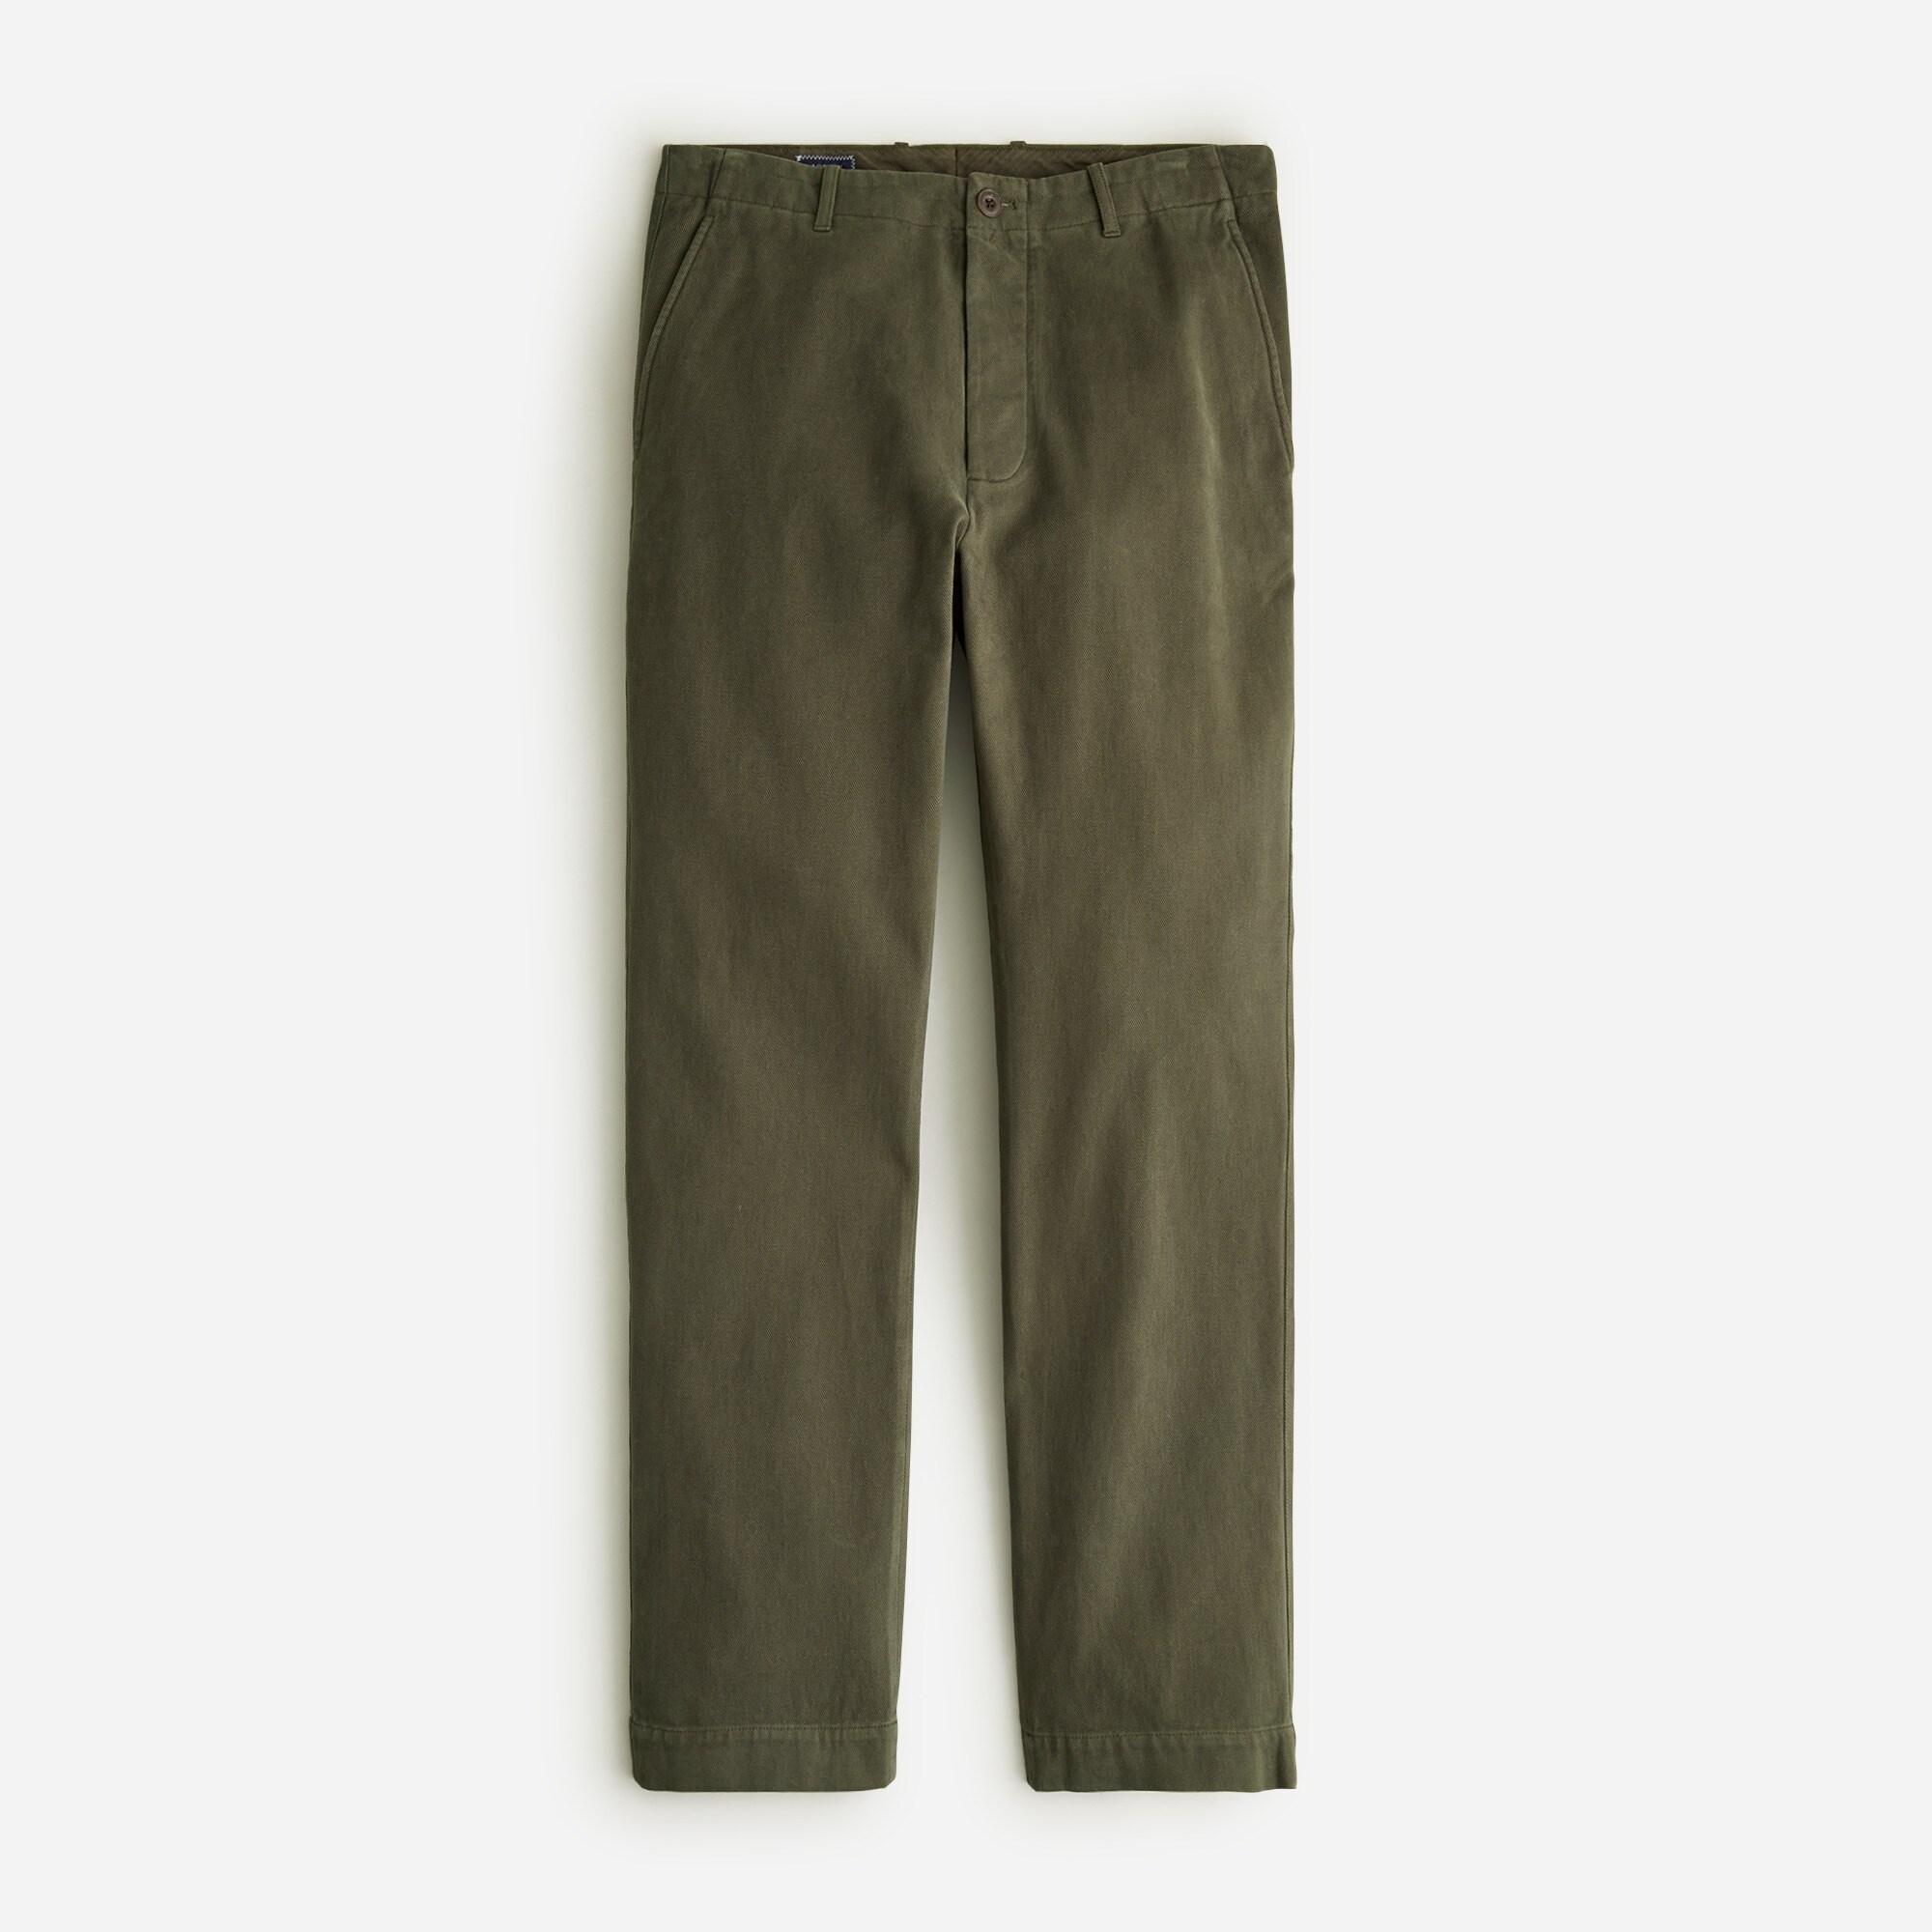  Garment-dyed suit pant in Italian cotton drill